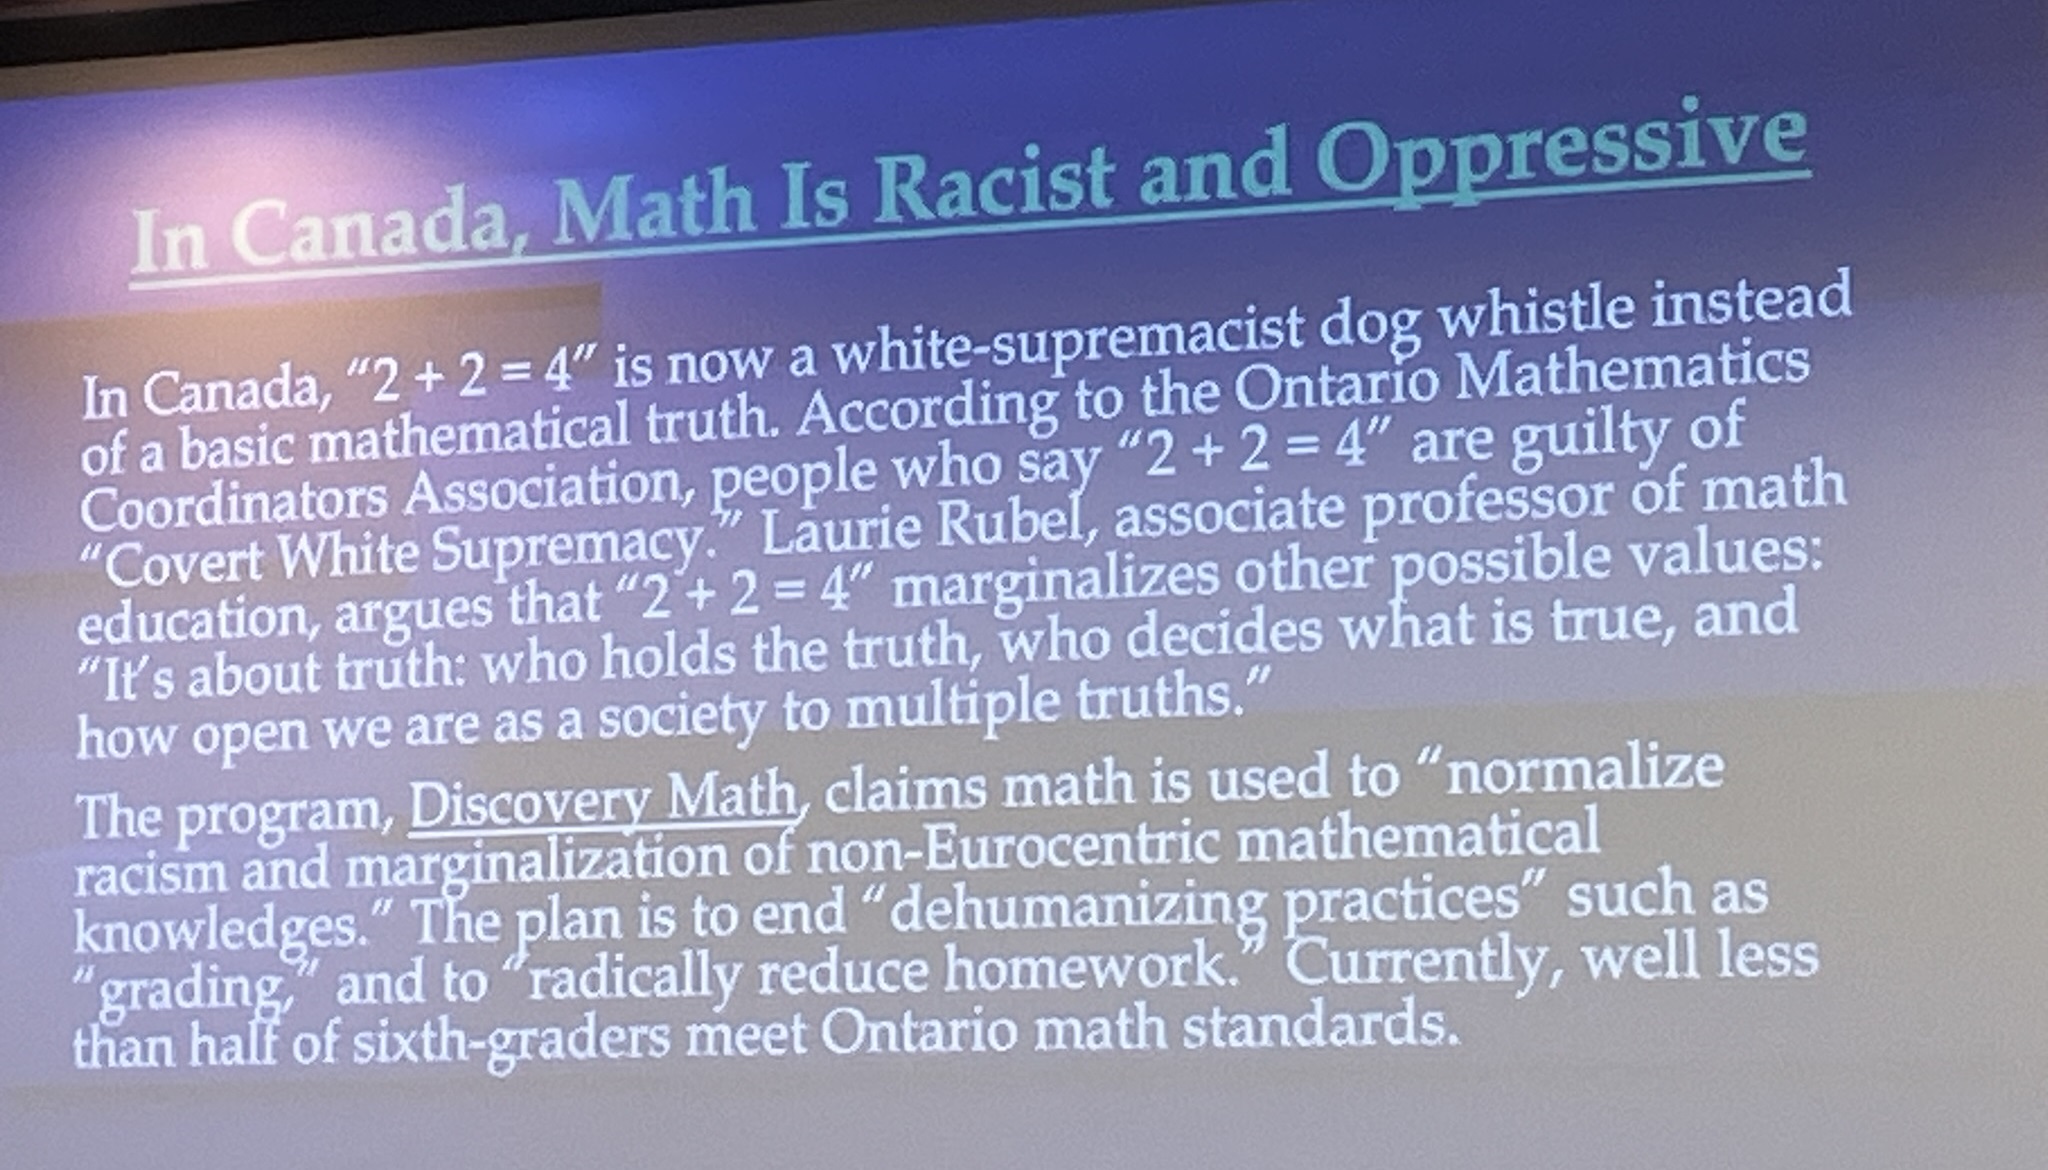 Canada considers math racist and oppressive.